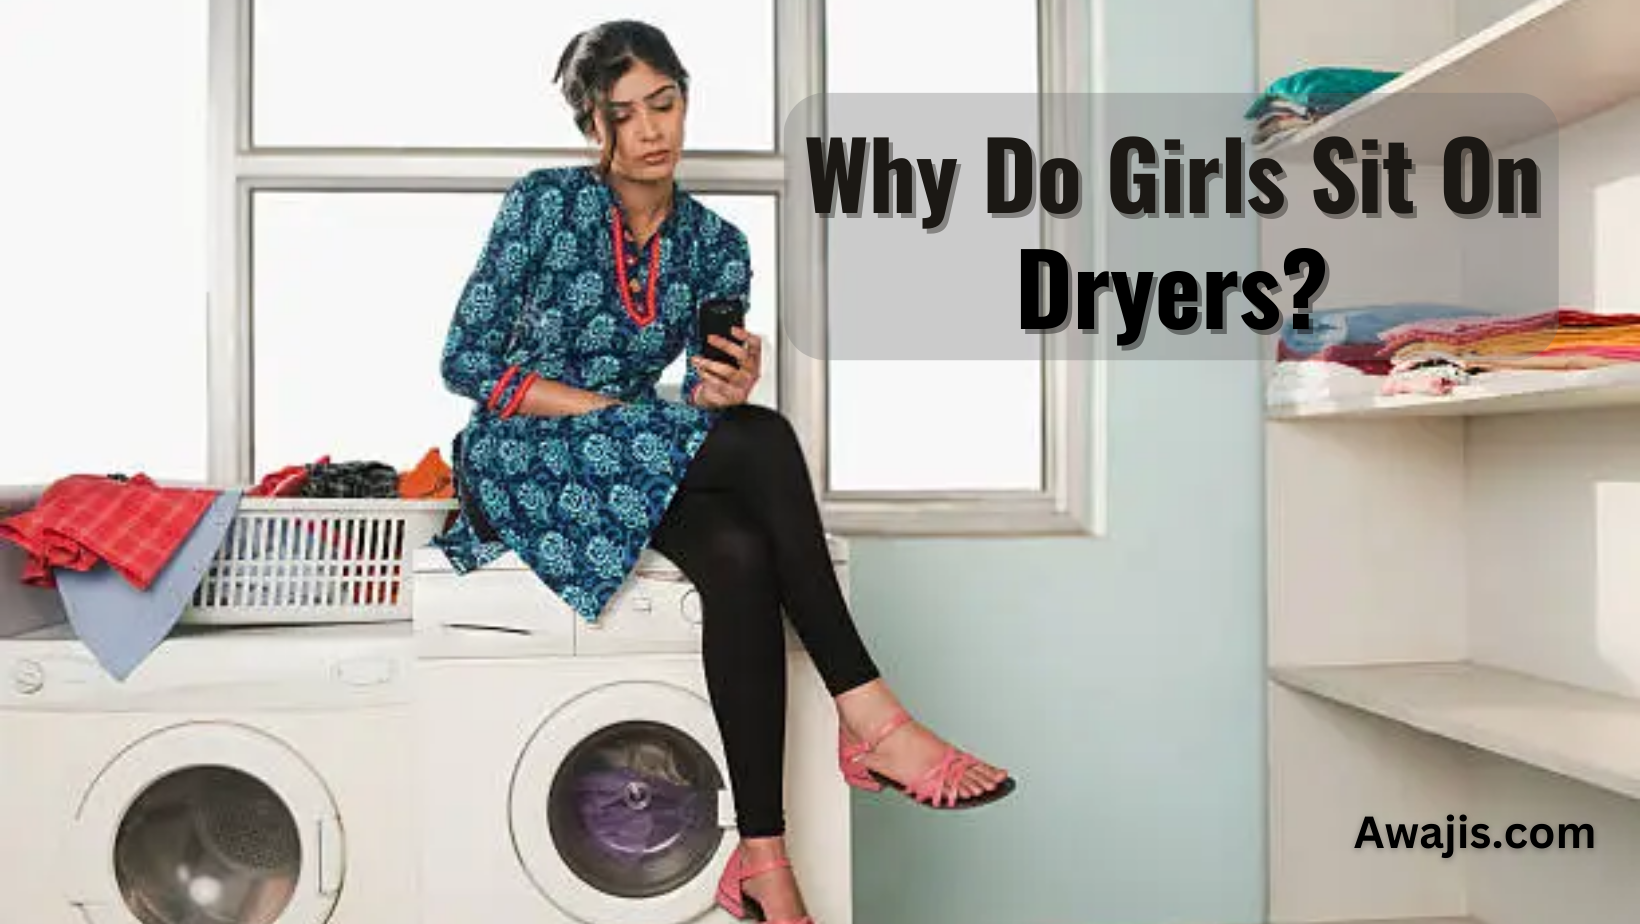 Why do girls sit on dryers (1)